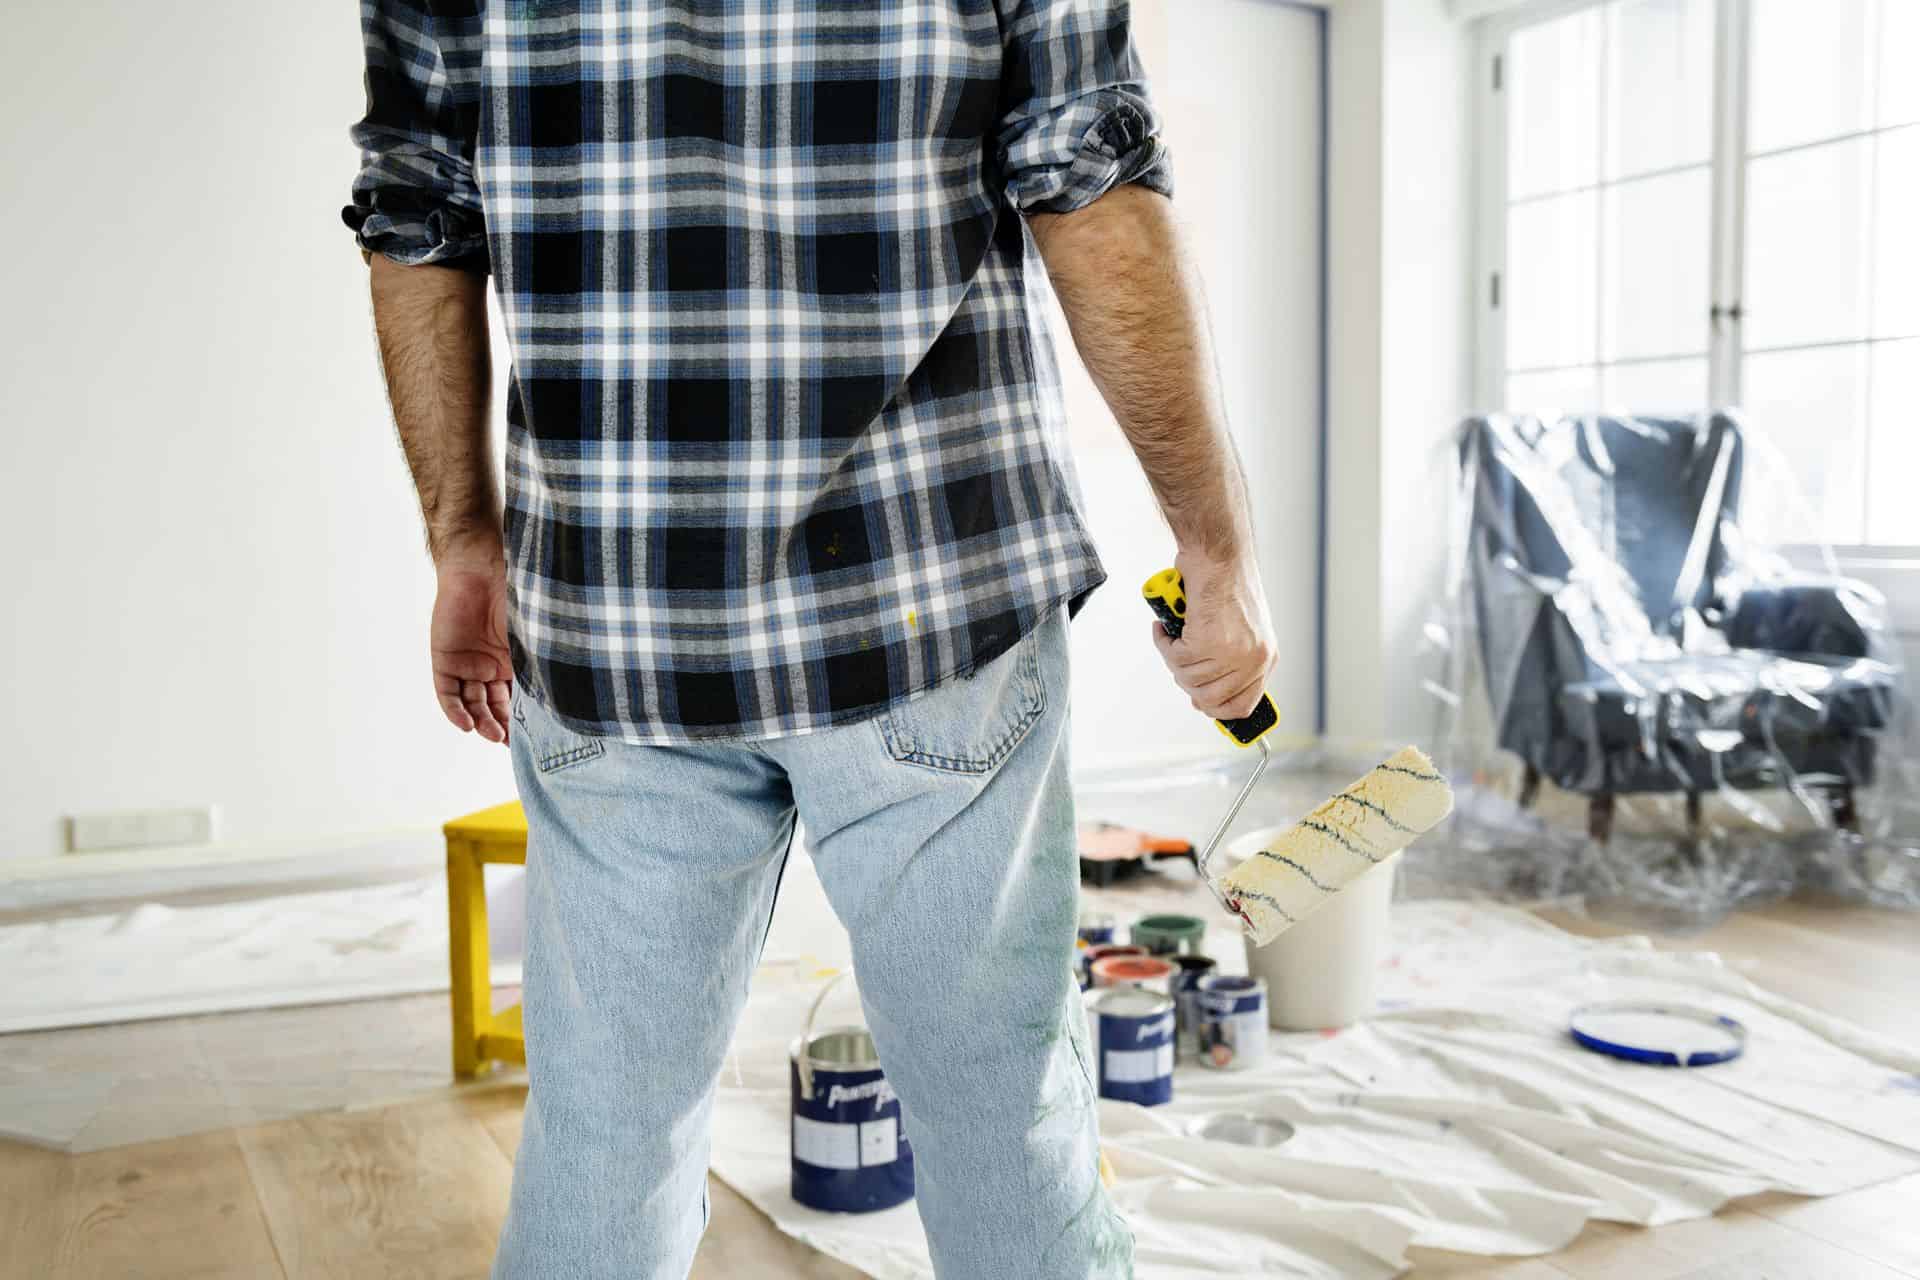 What to consider before renovating